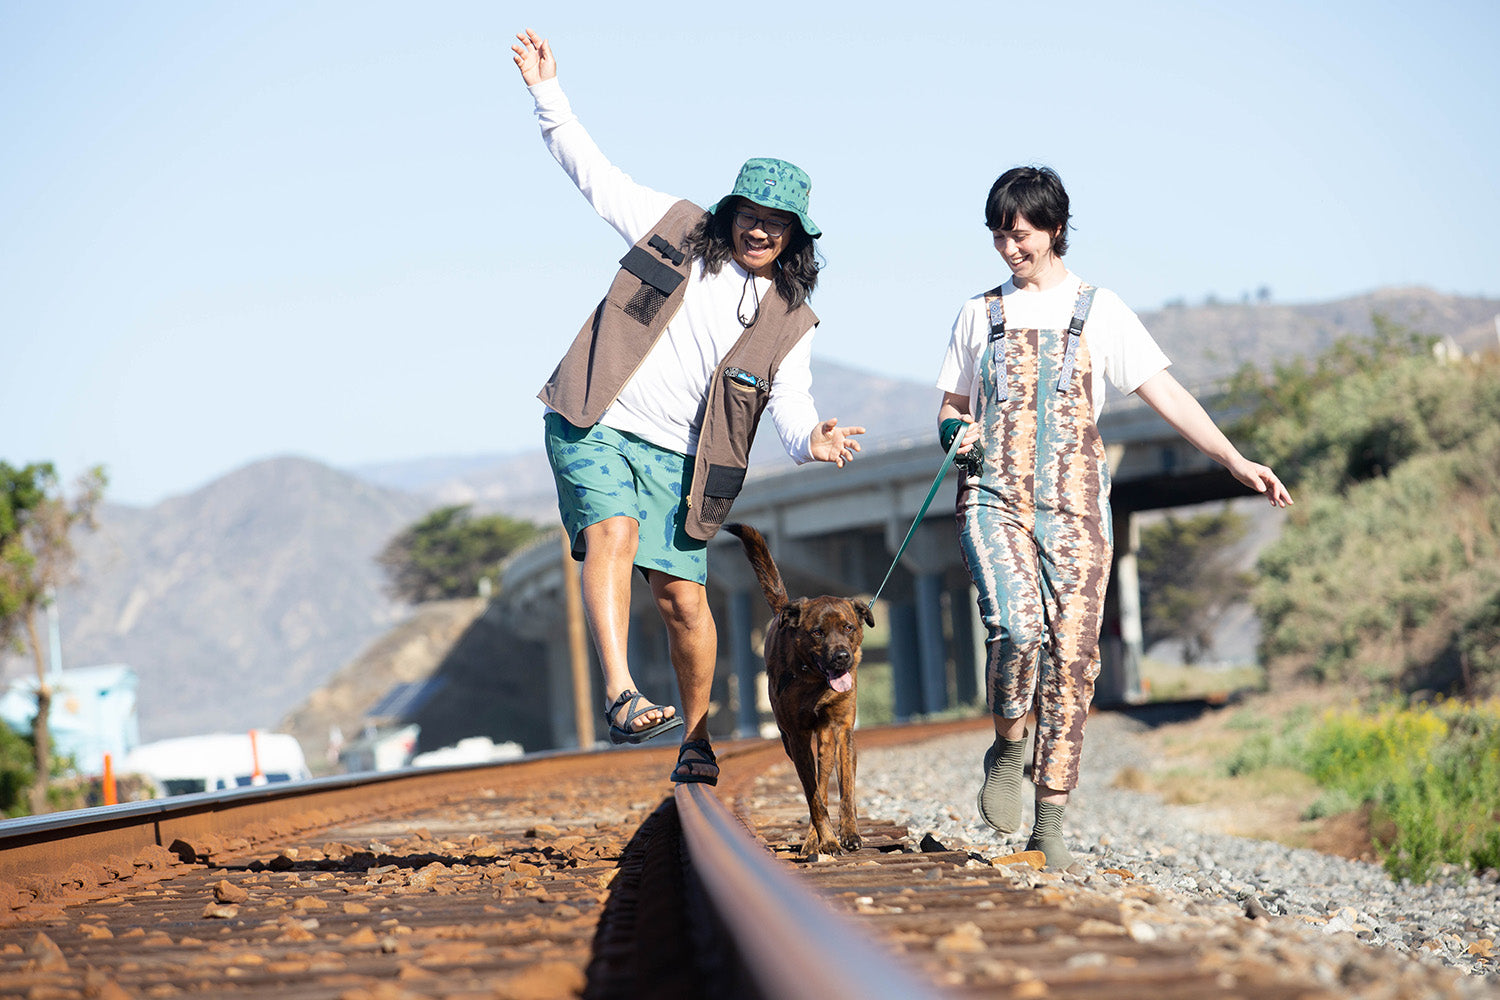 Global traveller style from American brand KAVU